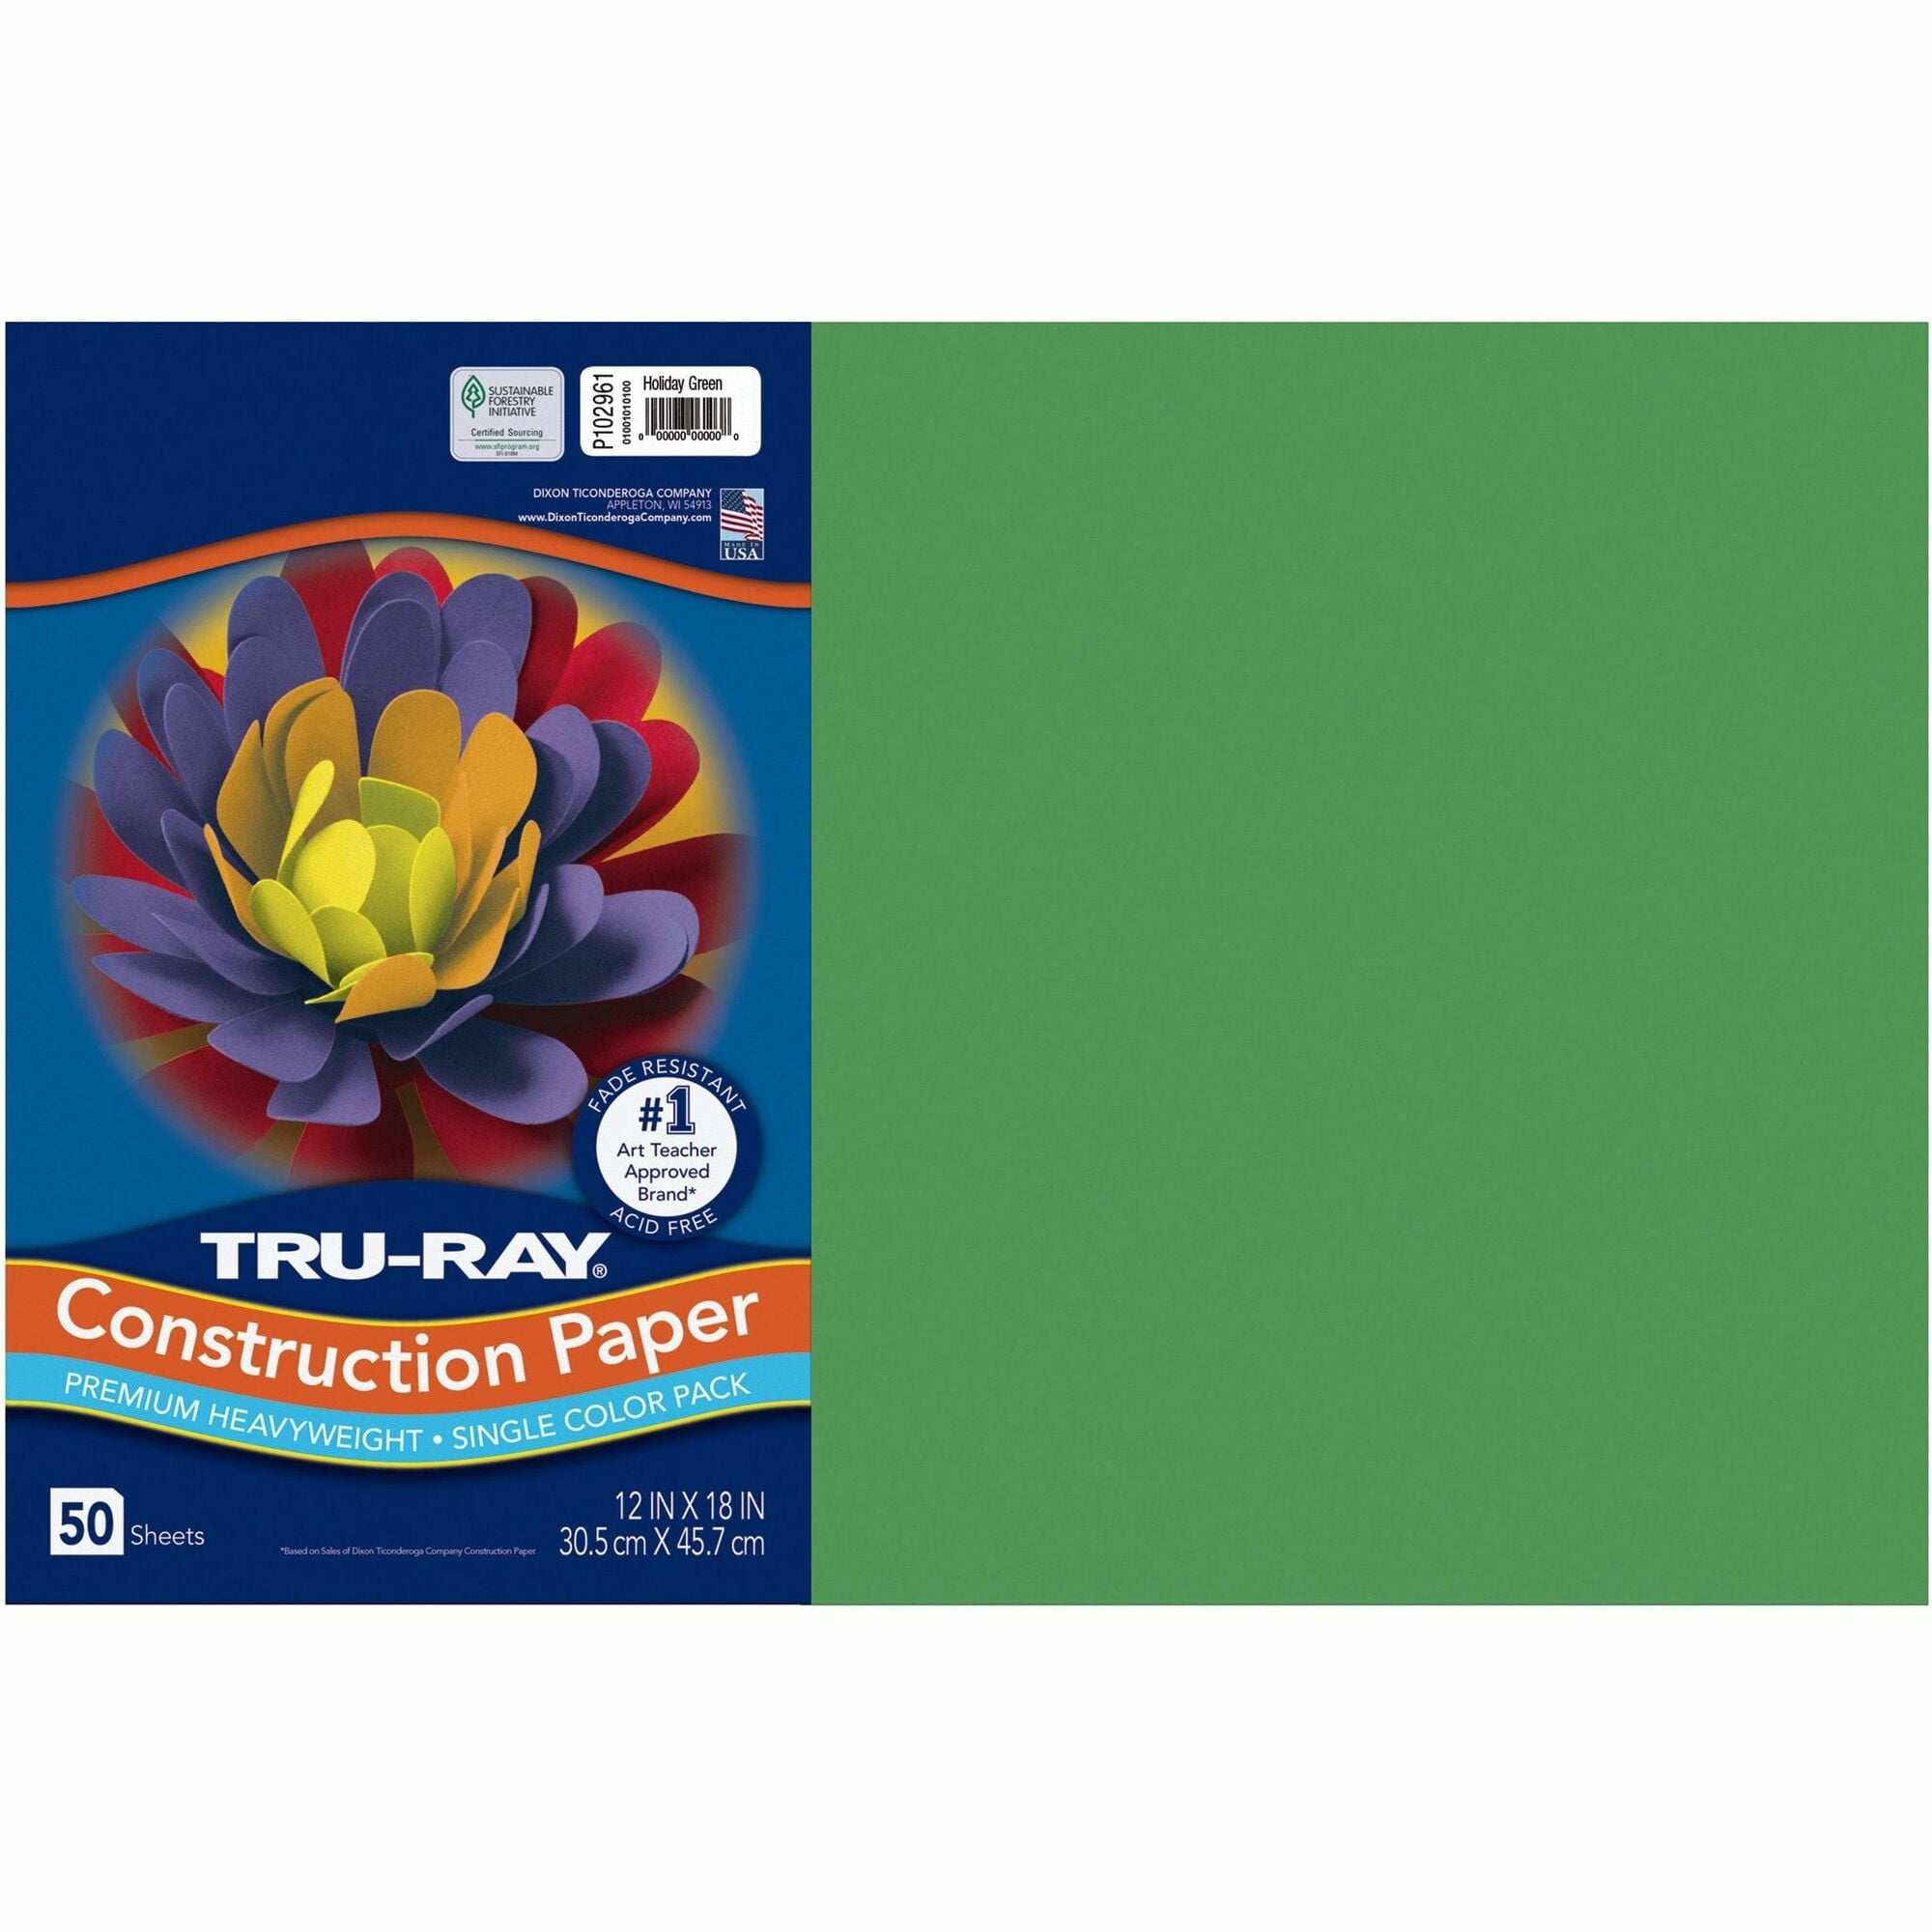 Tru-Ray Construction Paper 102947, 1 - Foods Co.